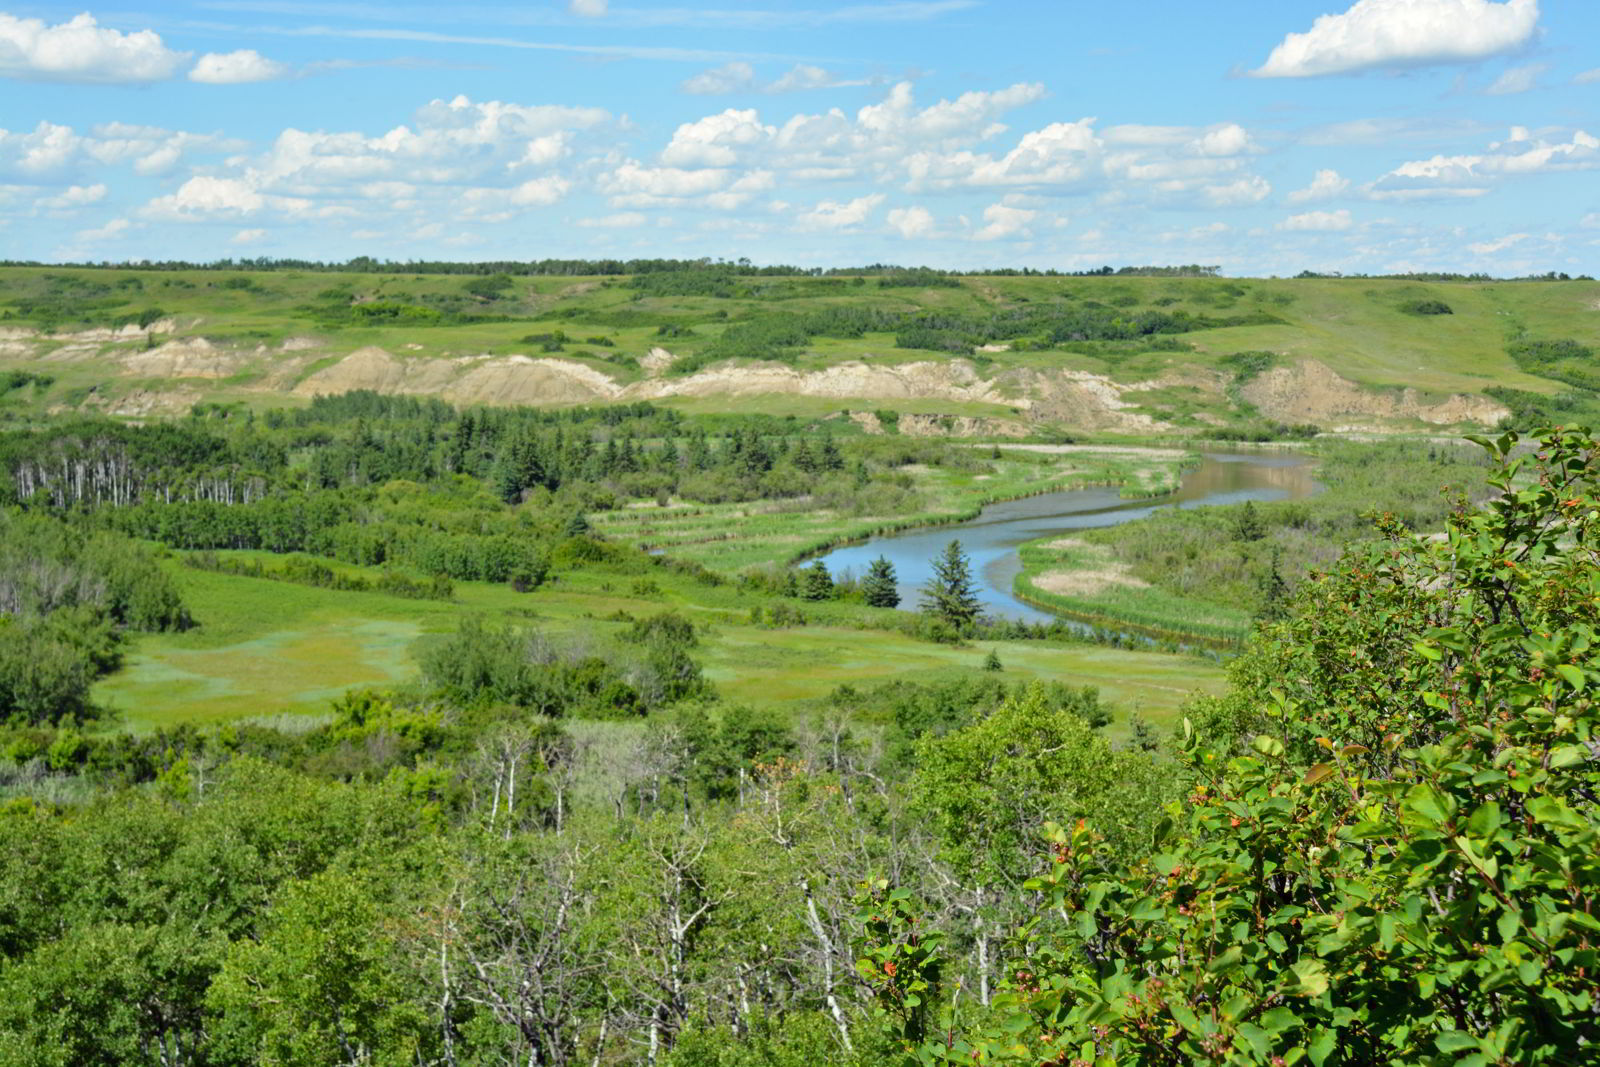 An image of the Battle River Valley in Big Knife Provincial Park in Alberta, Canada.